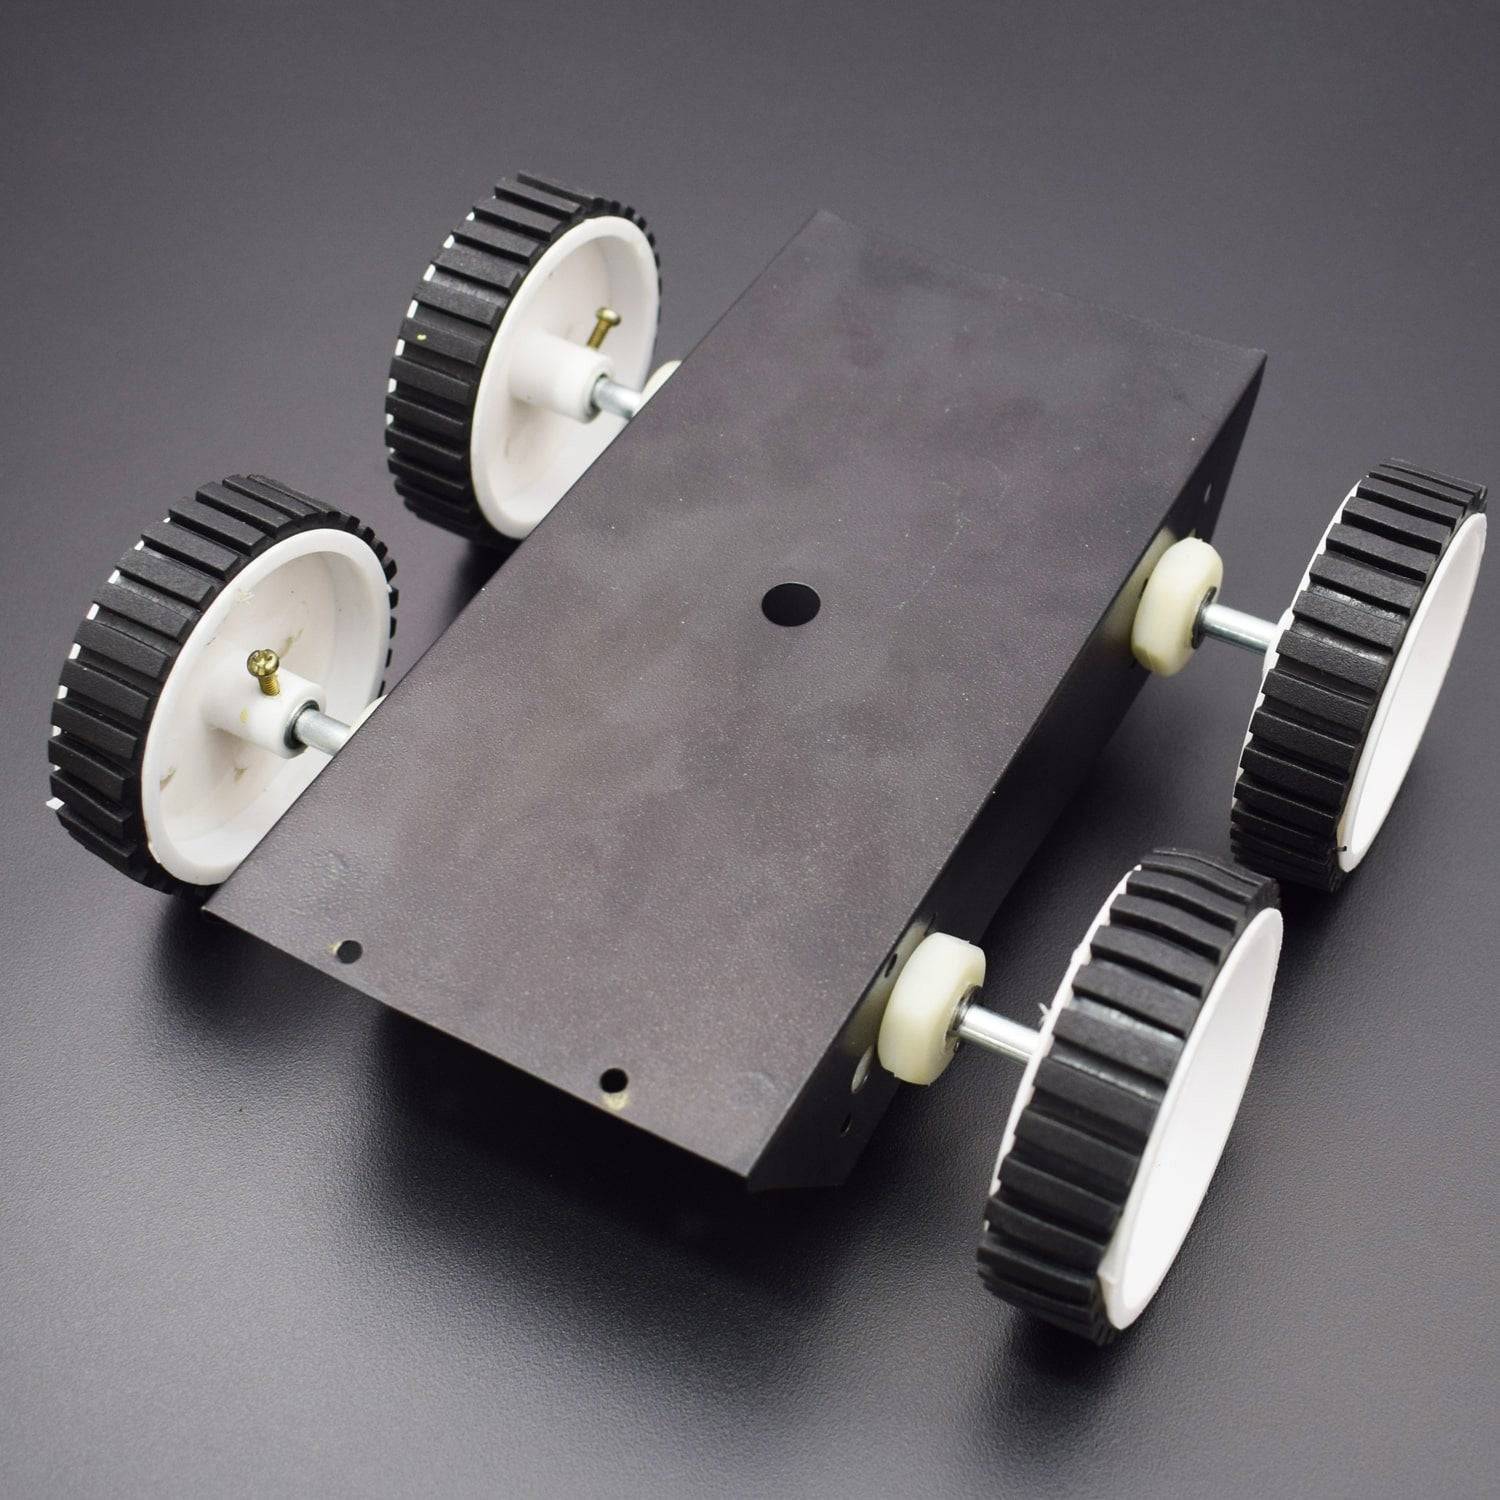 4 Wheel Robotic Platform DIY with DC gear motor, Chassis With Wheels - RS1056 - REES52